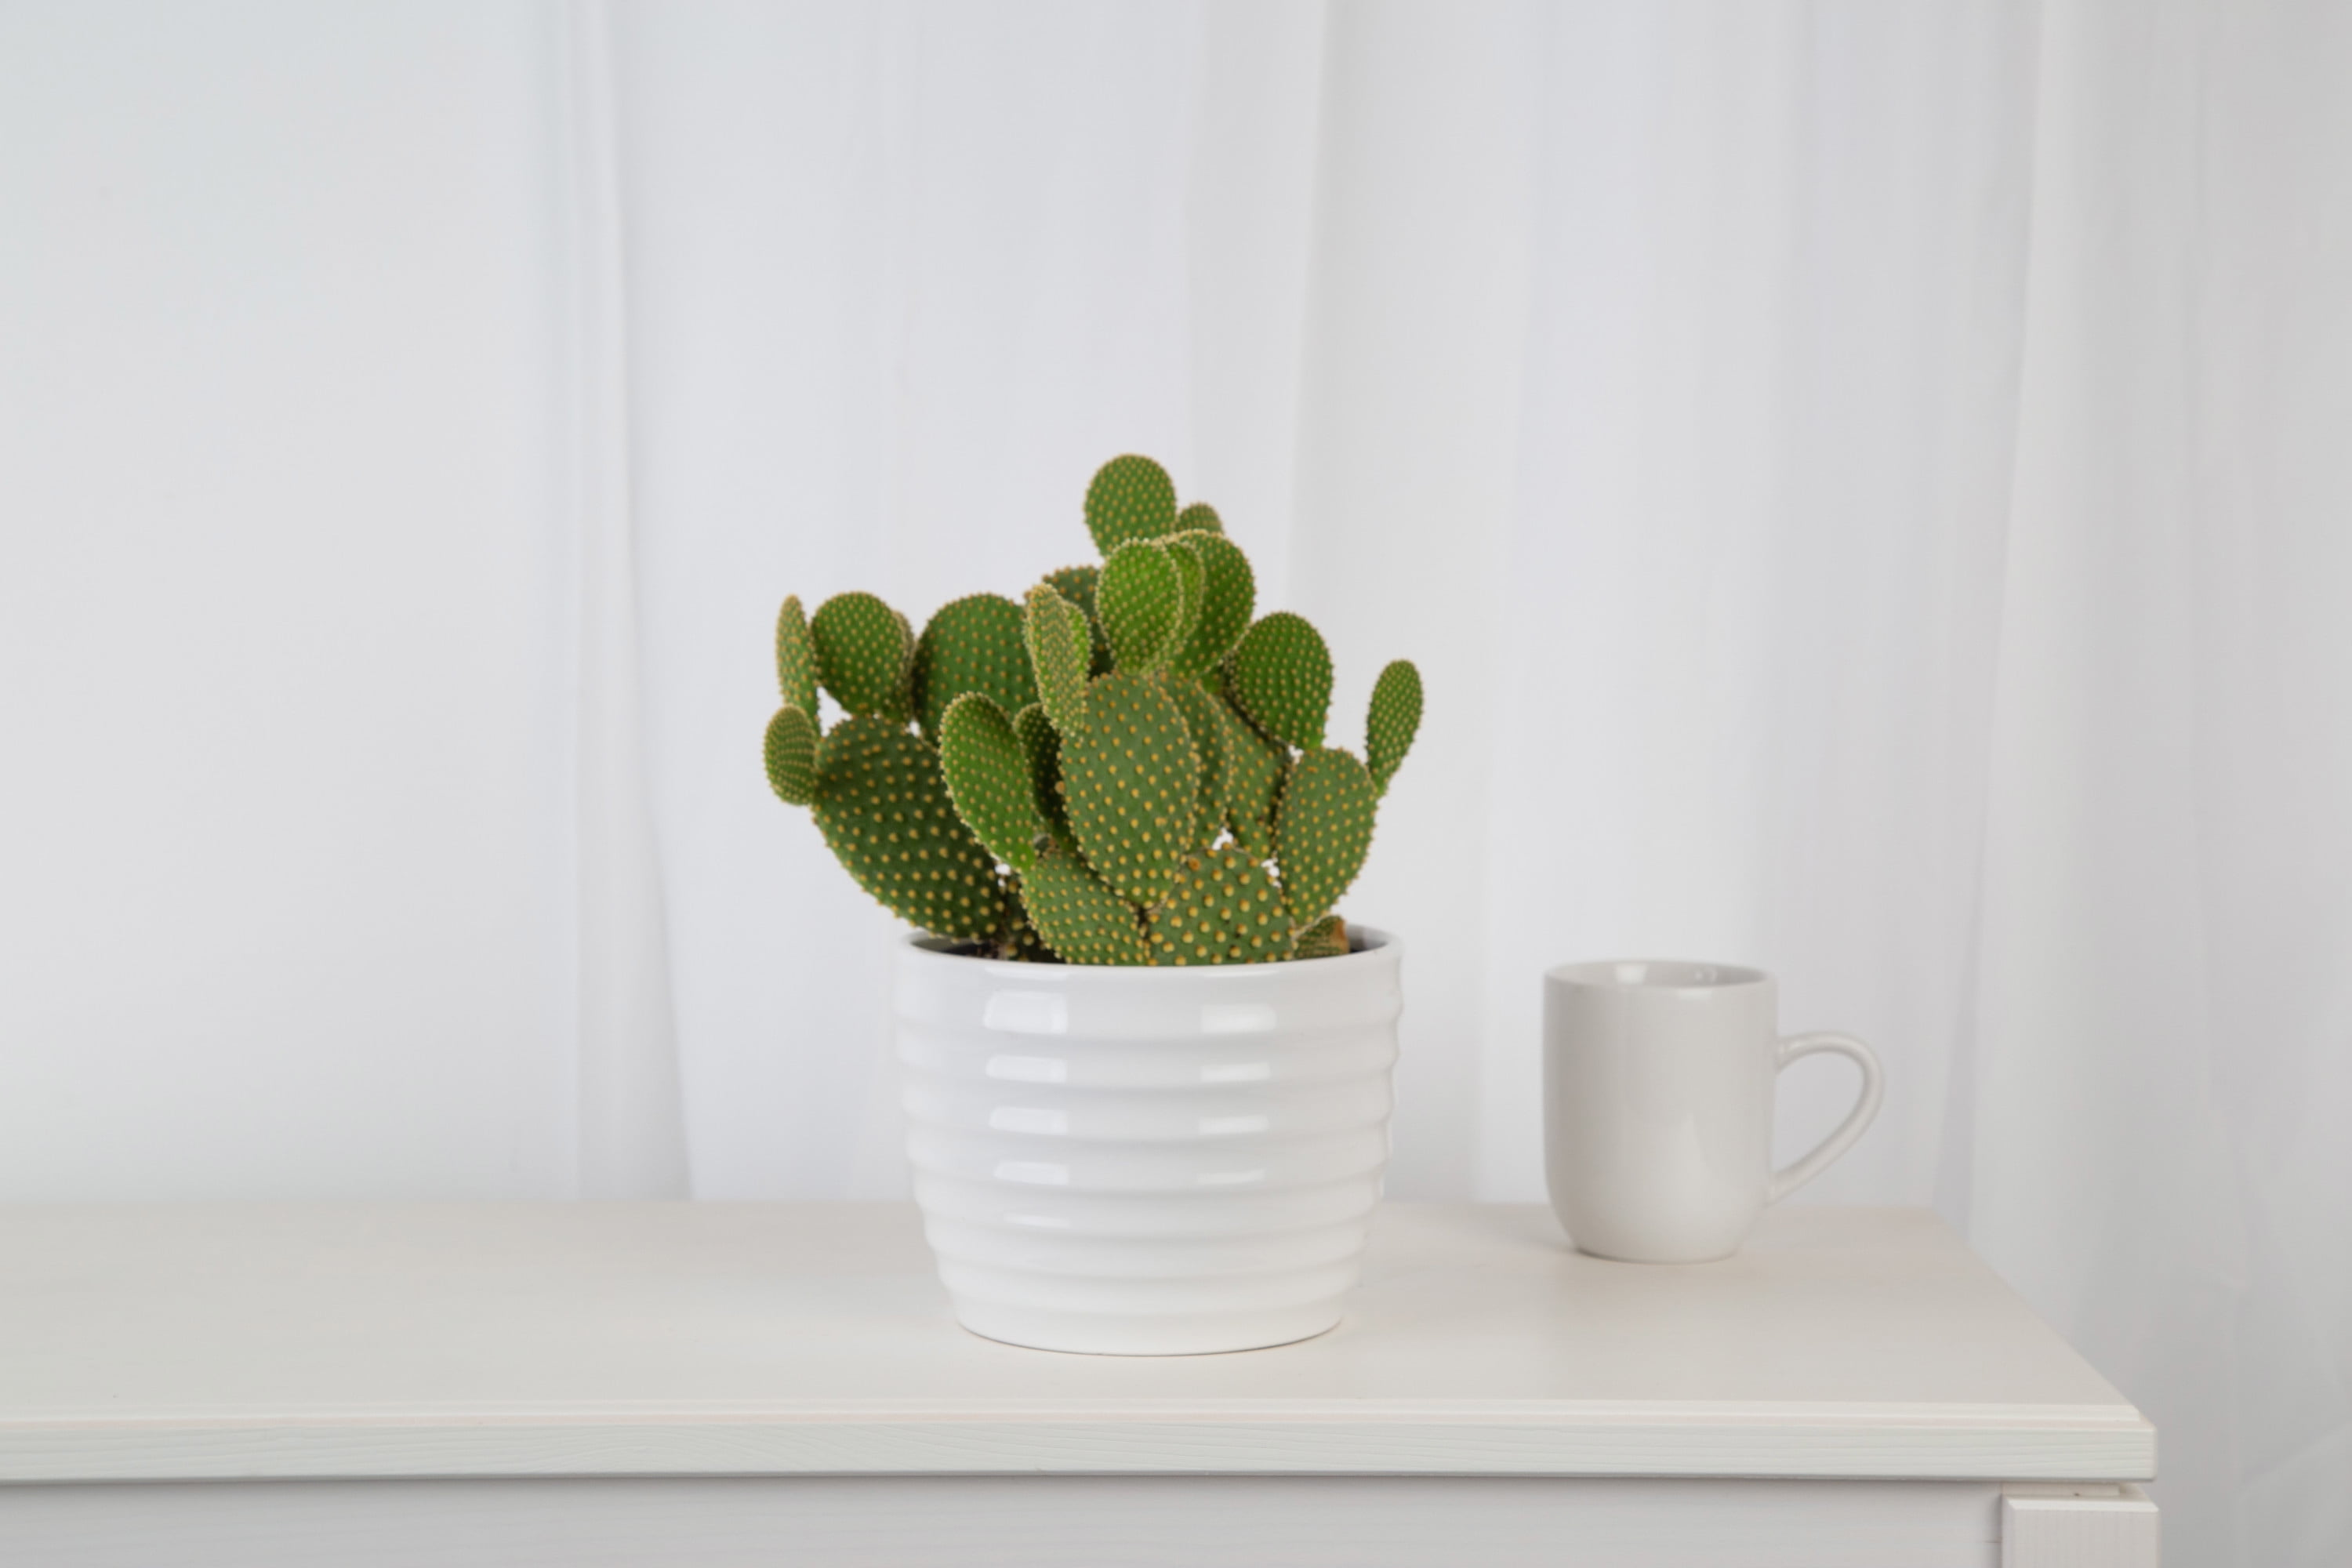 Costa Farms Indoor Cactus in 2.5 in. White Ceramic Planter, Avg. Shipping  Height 4 in. Tall CO.CAC2.5.13.CE - The Home Depot